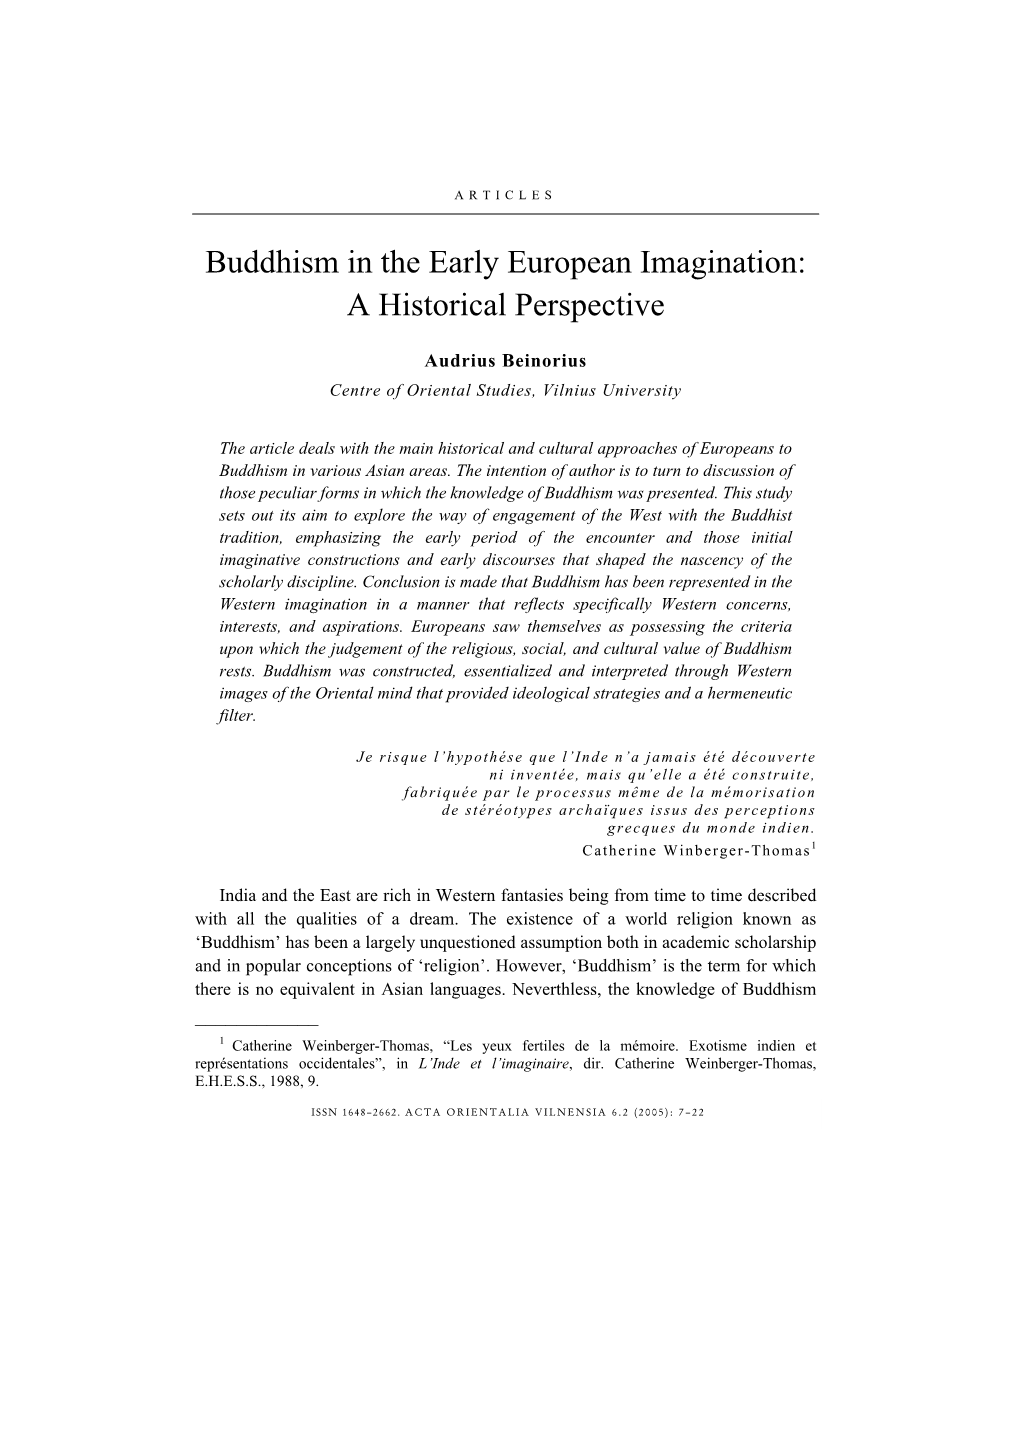 Buddhism in the Early European Imagination 7